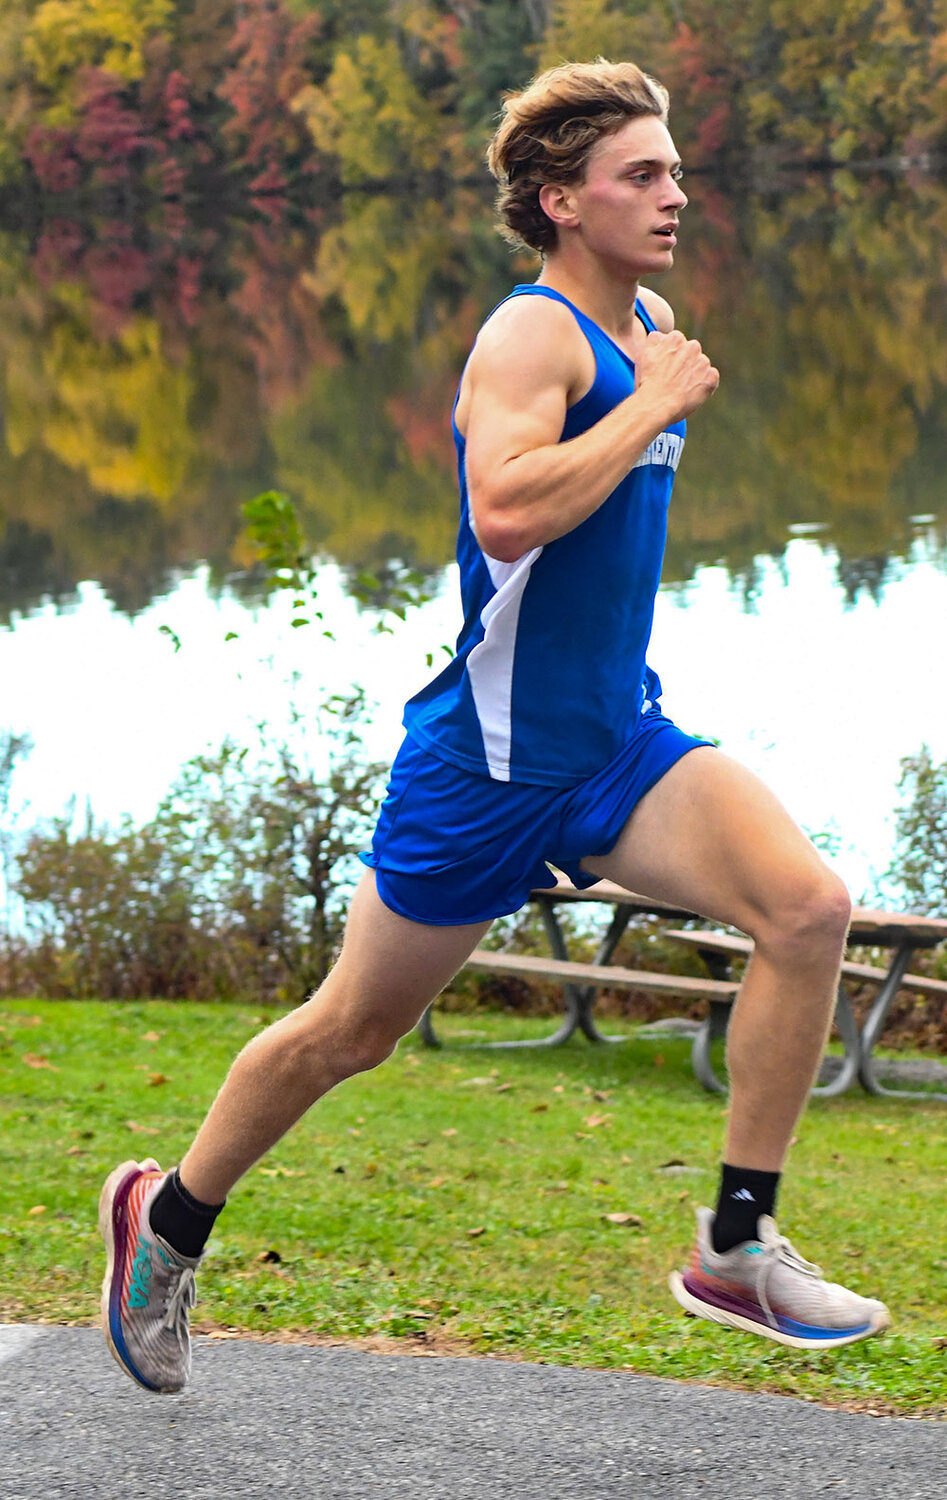 Valley Central's Caleb Sahlstrom runs toward the finish at a non-league cross-country meet on Oct. 17 at Chadwick Lake Park in Newburgh.